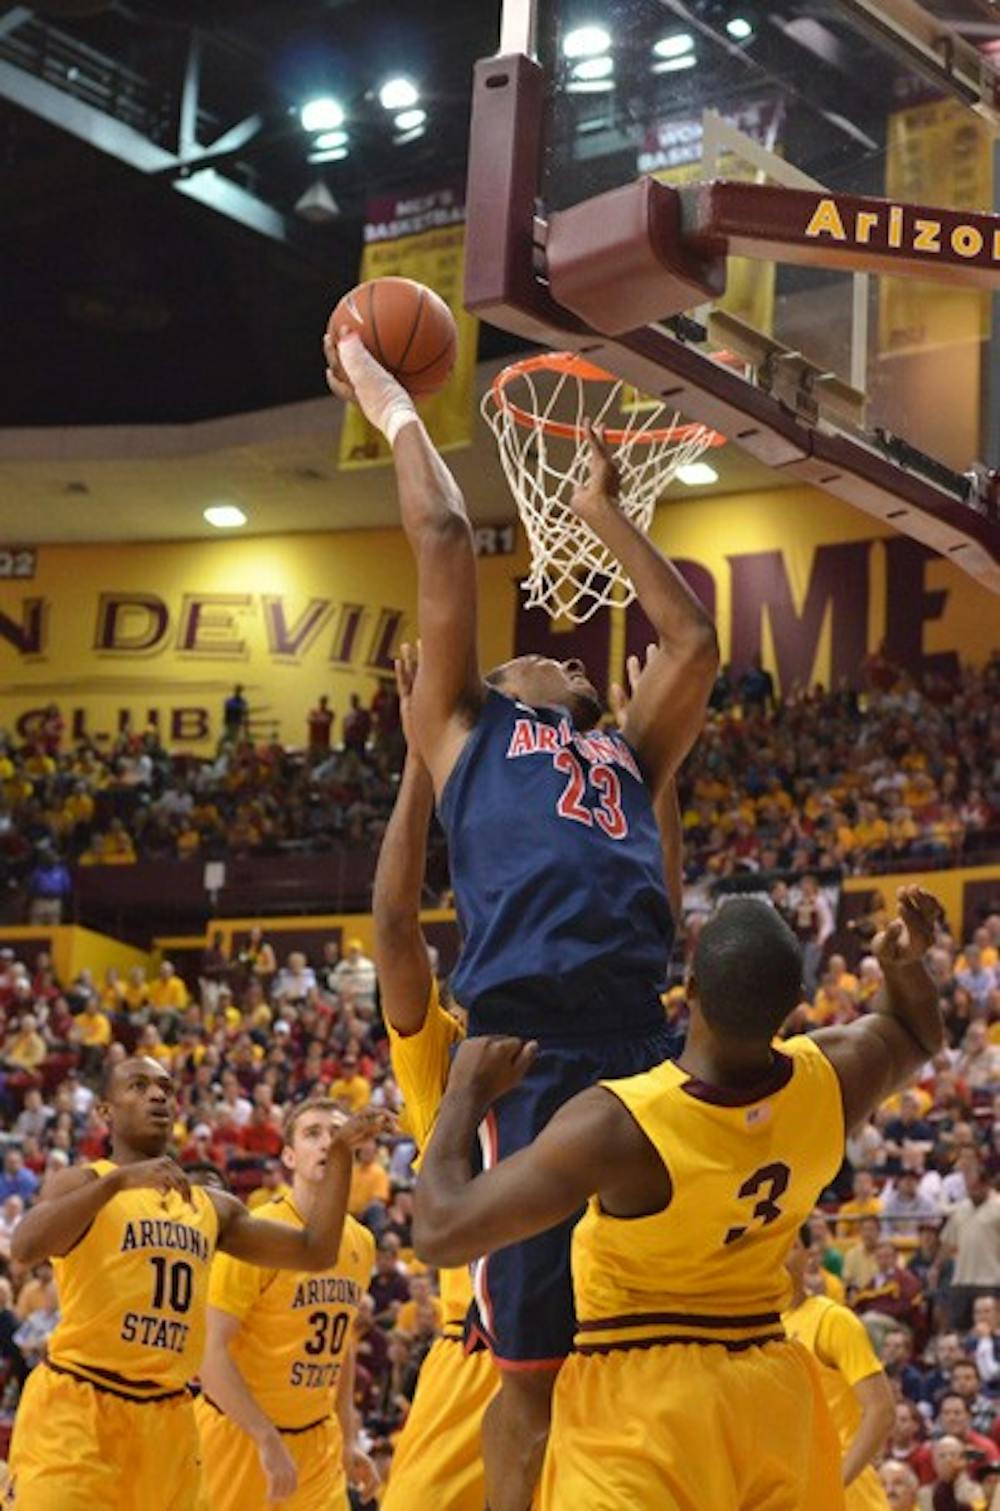 No success: UA sophomore forward Derrick Williams goes up for a layup over the top of ASU senior guard Ty Abbott during the Wildcats’ 67-52 victory over the Sun Devils in Tempe on Sunday night. It was ASU’s 10th straight Pac-10 loss (Photo by Aaron Lavinsky)